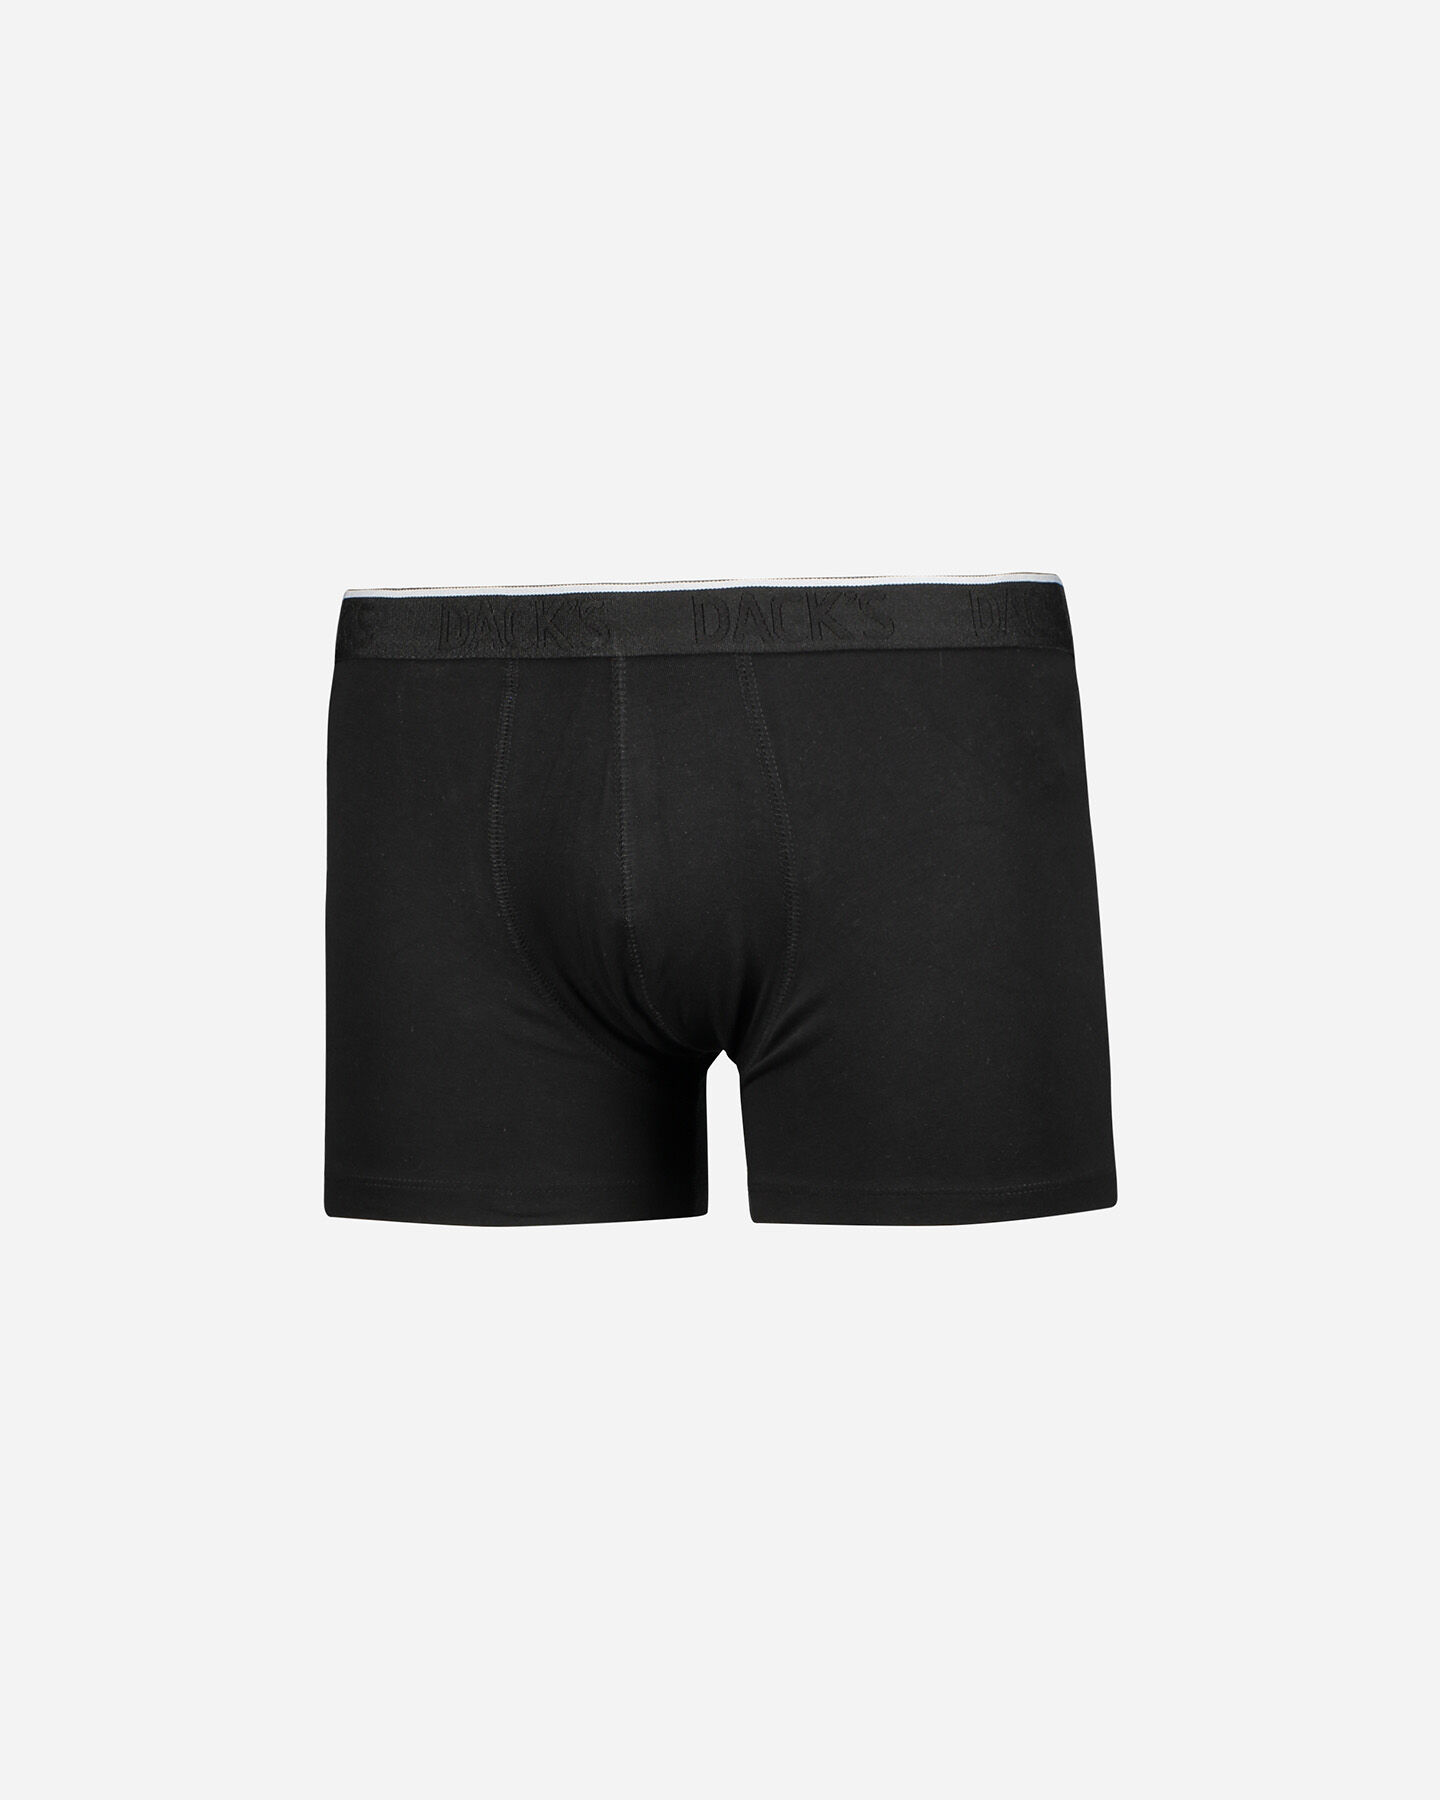  Intimo DACK'S BIPACK BASIC BOXER M S4061962|050/001|L scatto 2